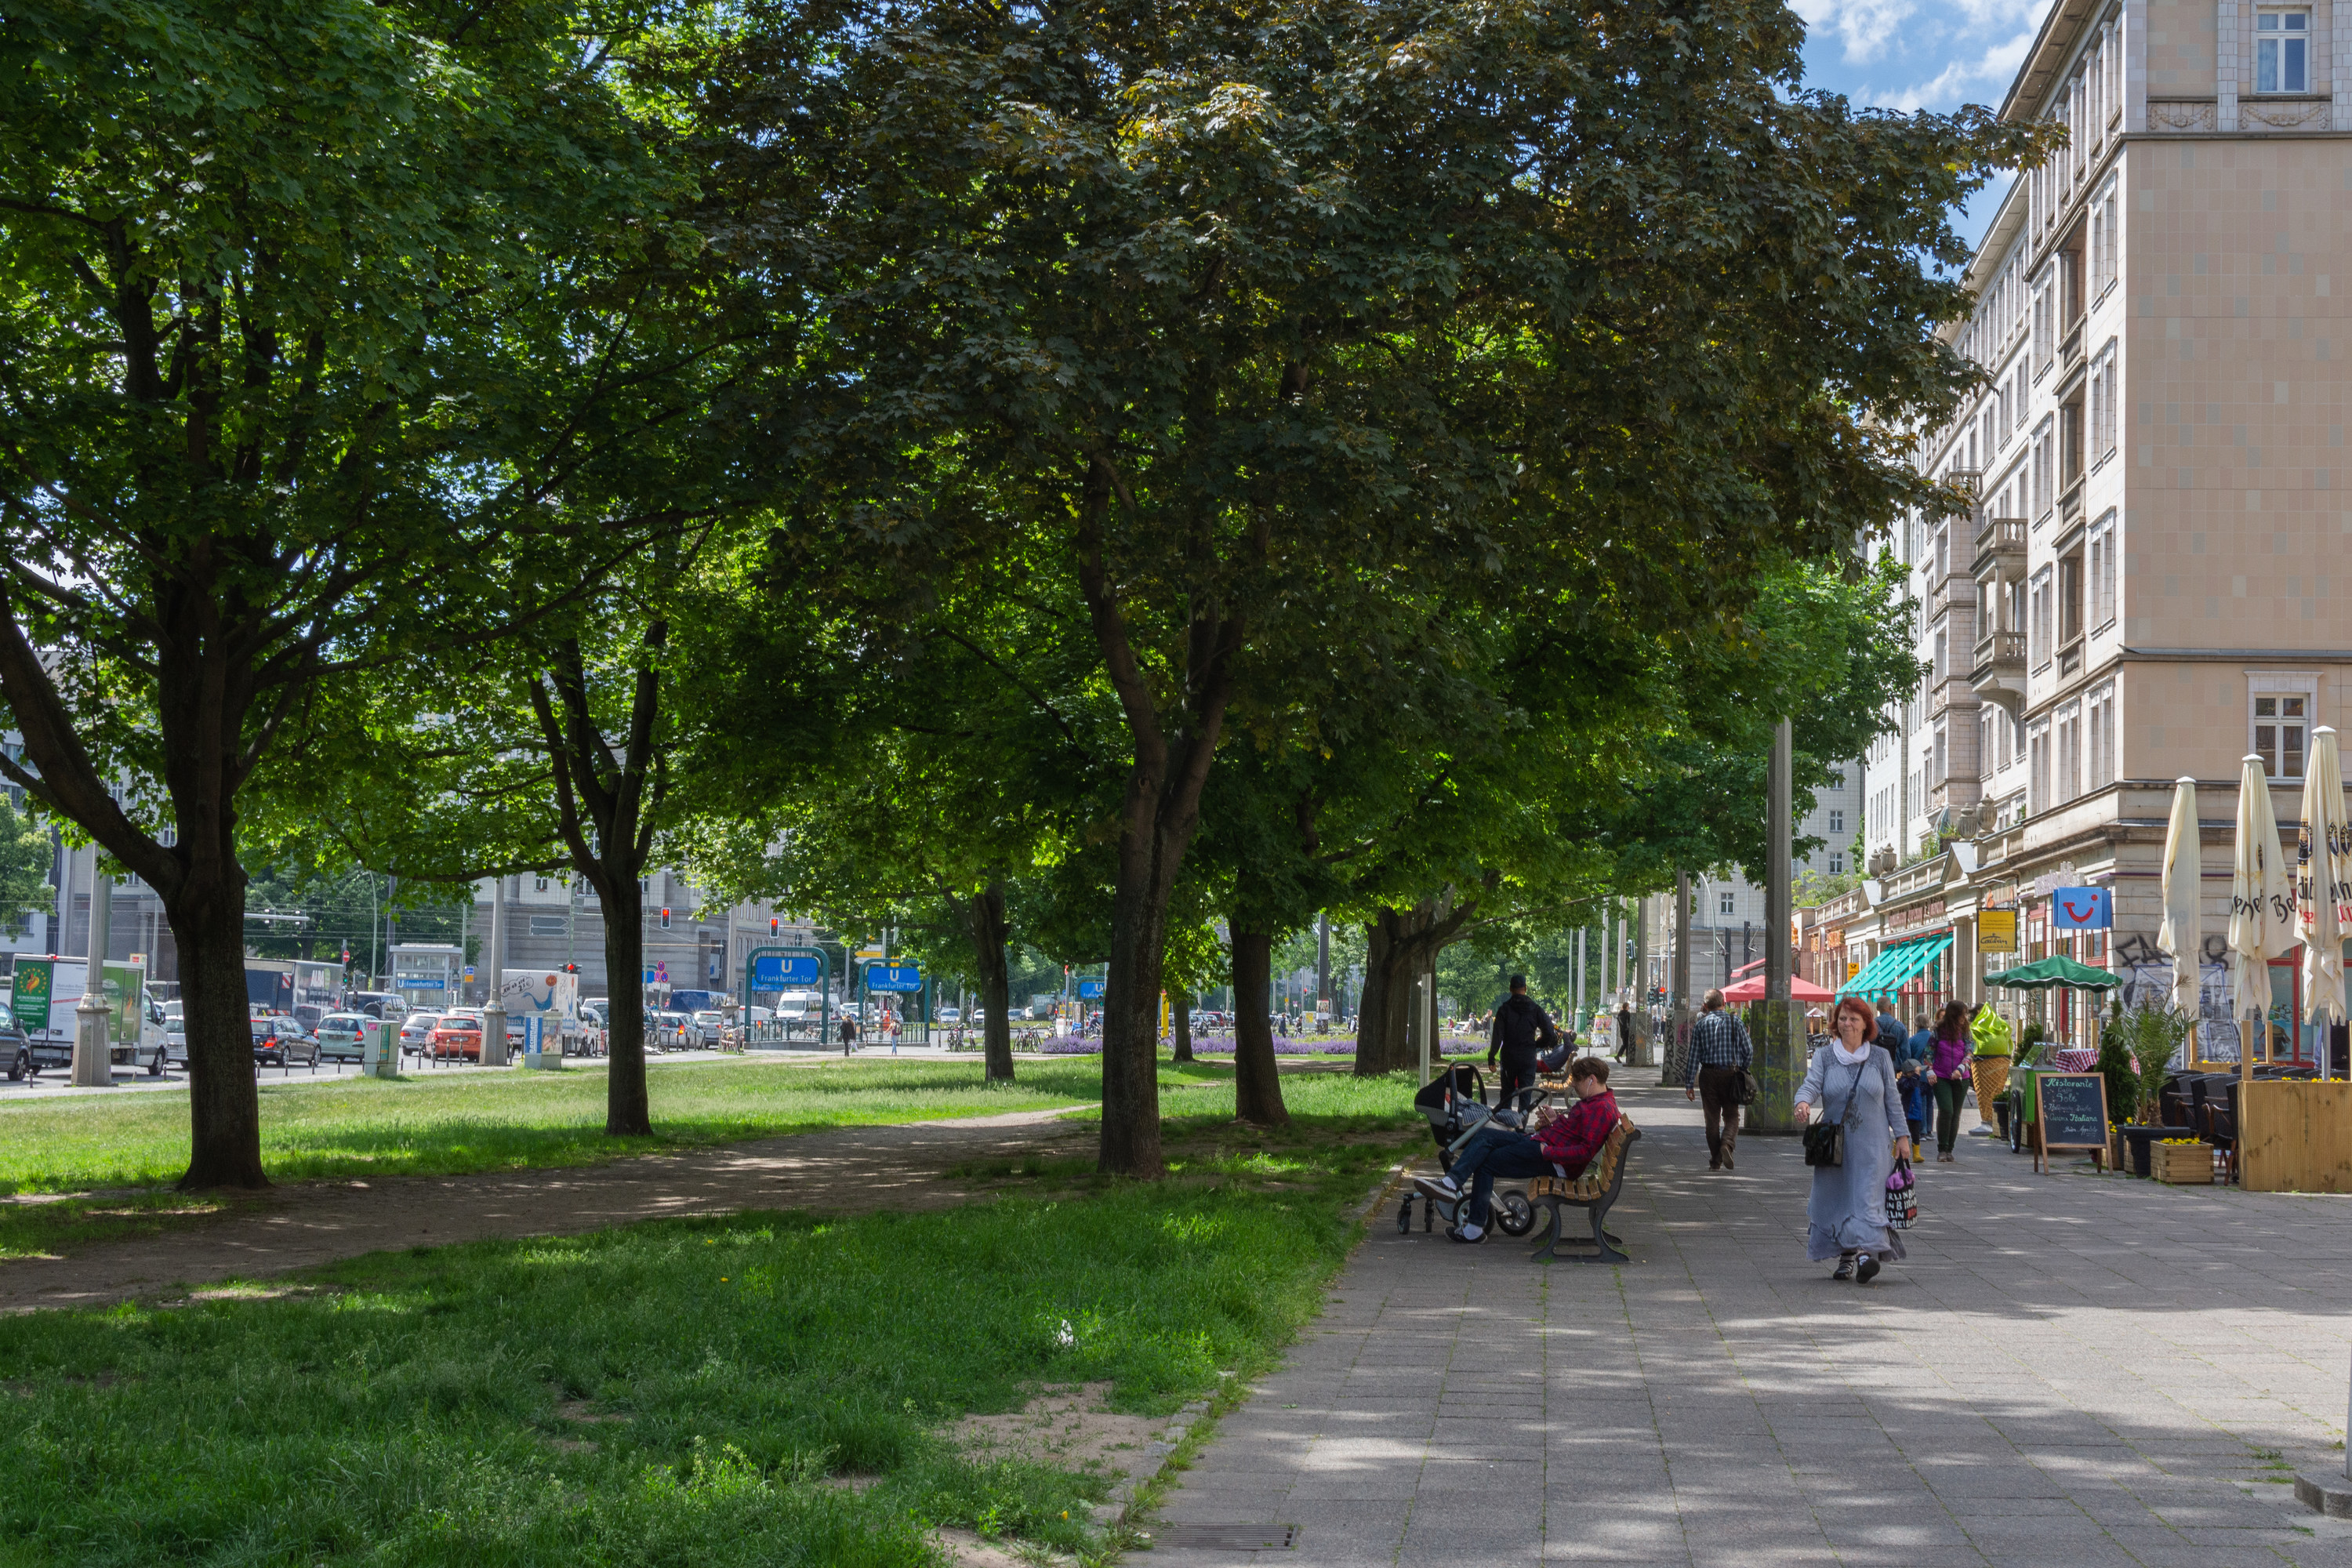 A strip of the boulevard of Frankfurter Allee, shaded by trees